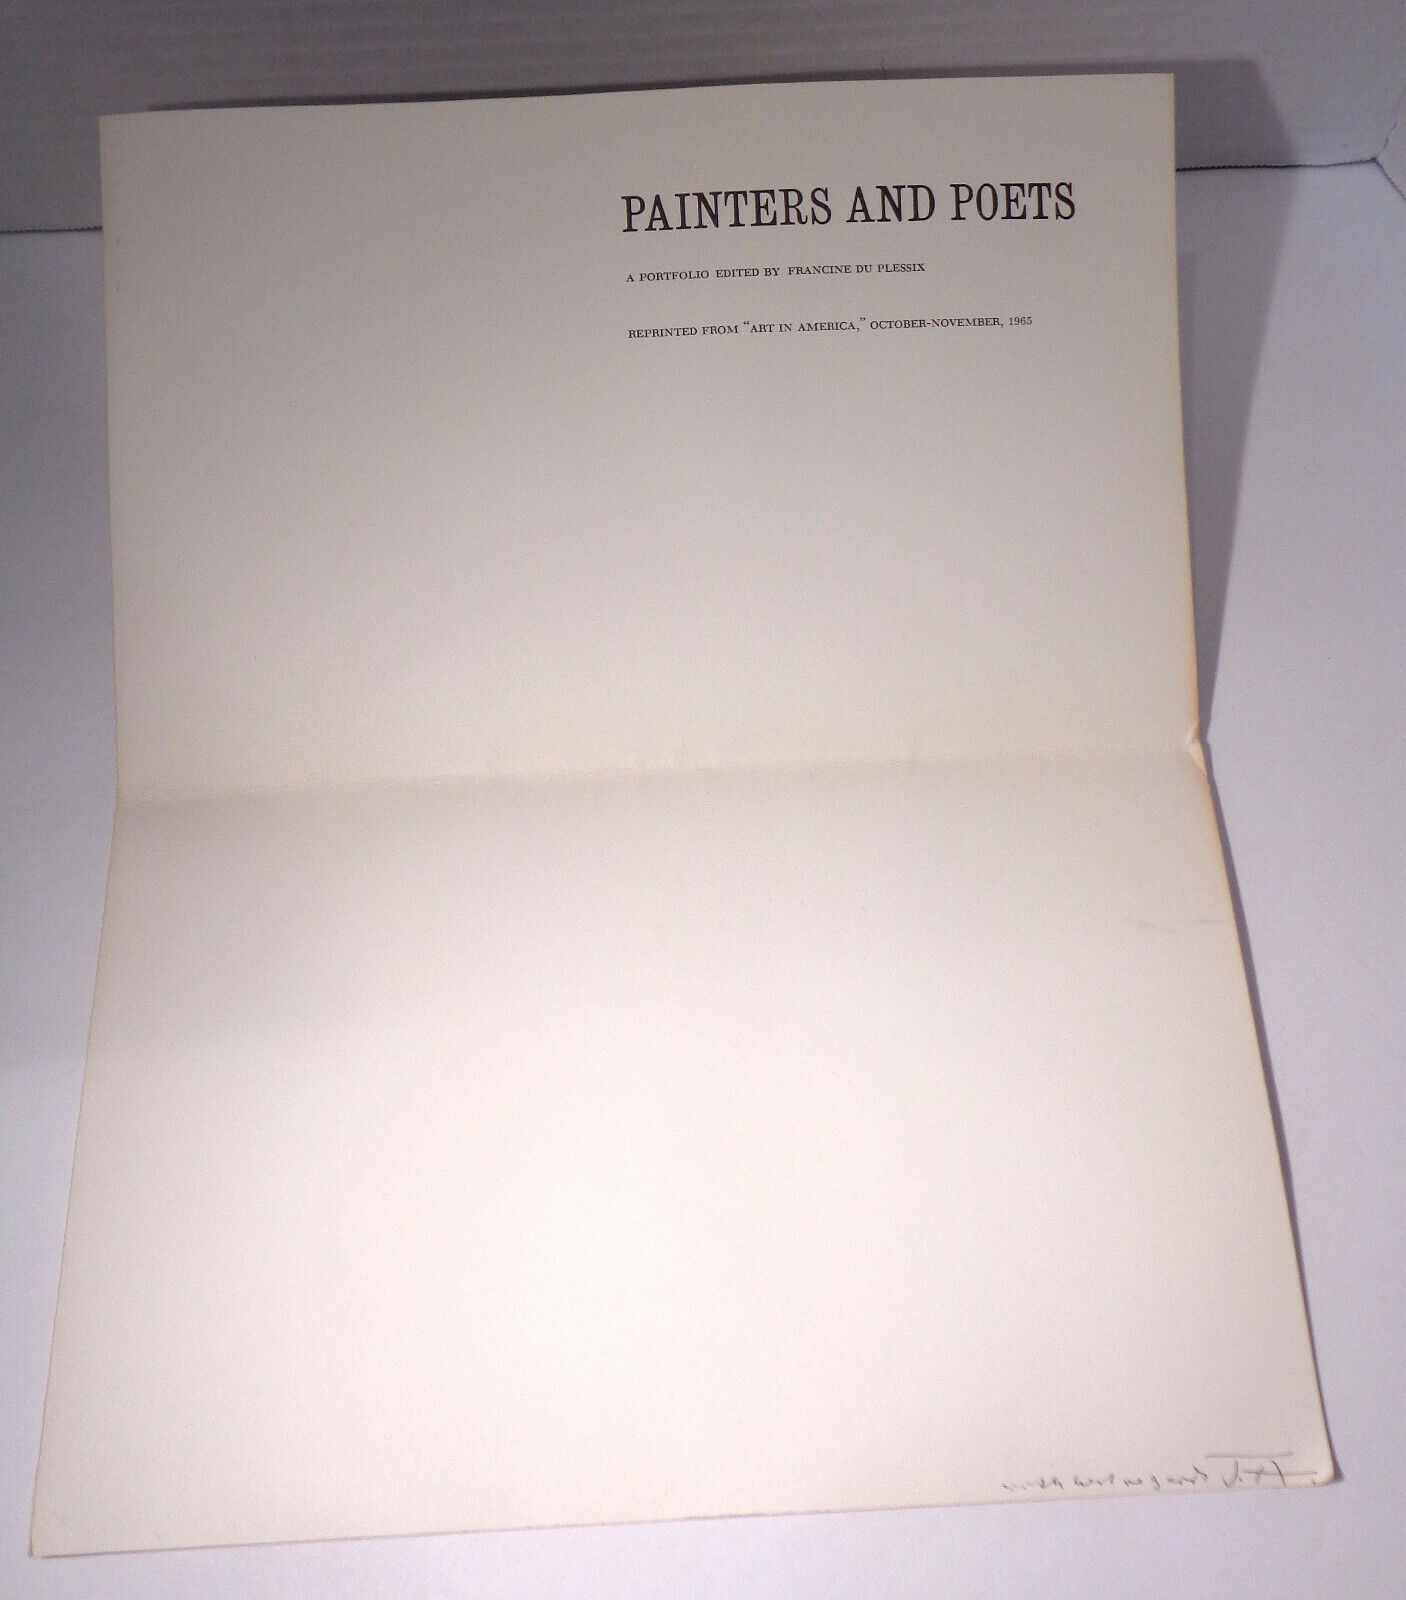 Signed Josef Albers Folio - Painters and Poets, A Portfolio edited by Plessix